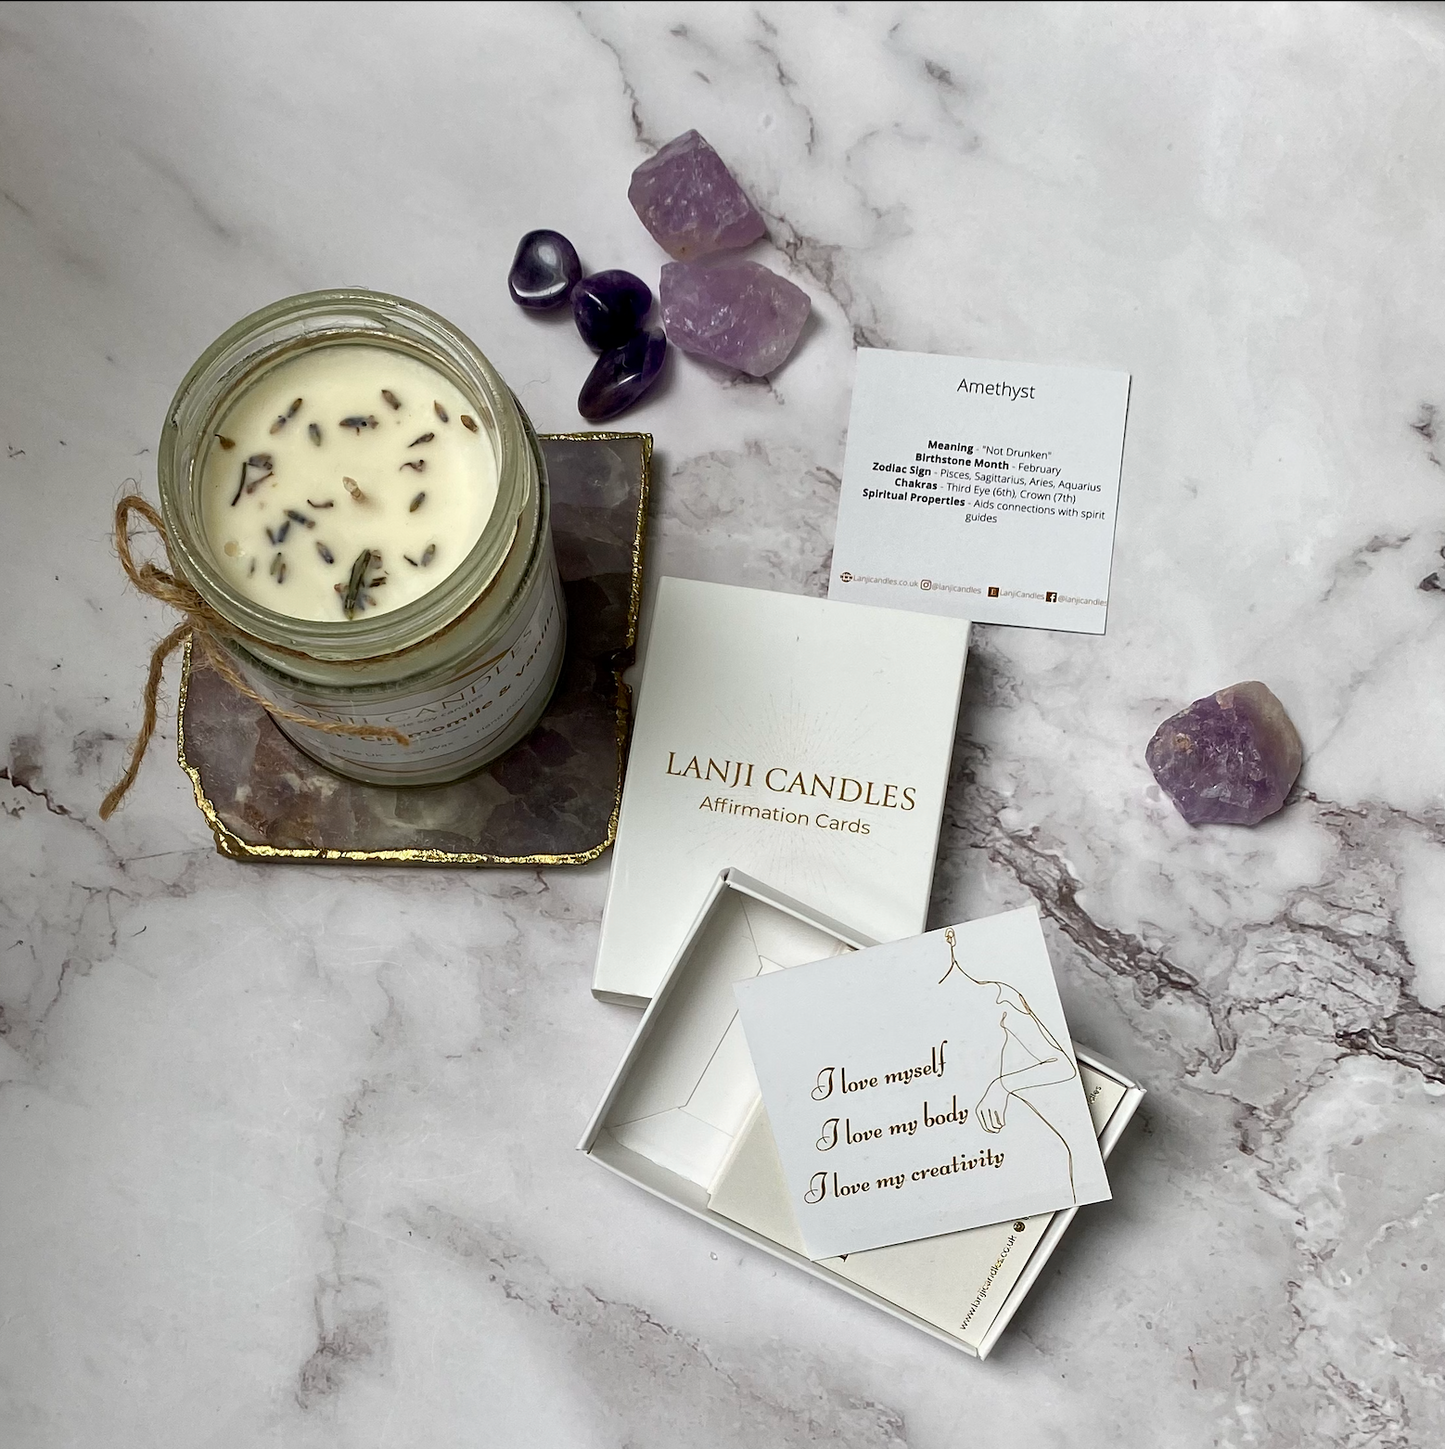 Affirmation Card Pack With Crystal - Lanji Candles